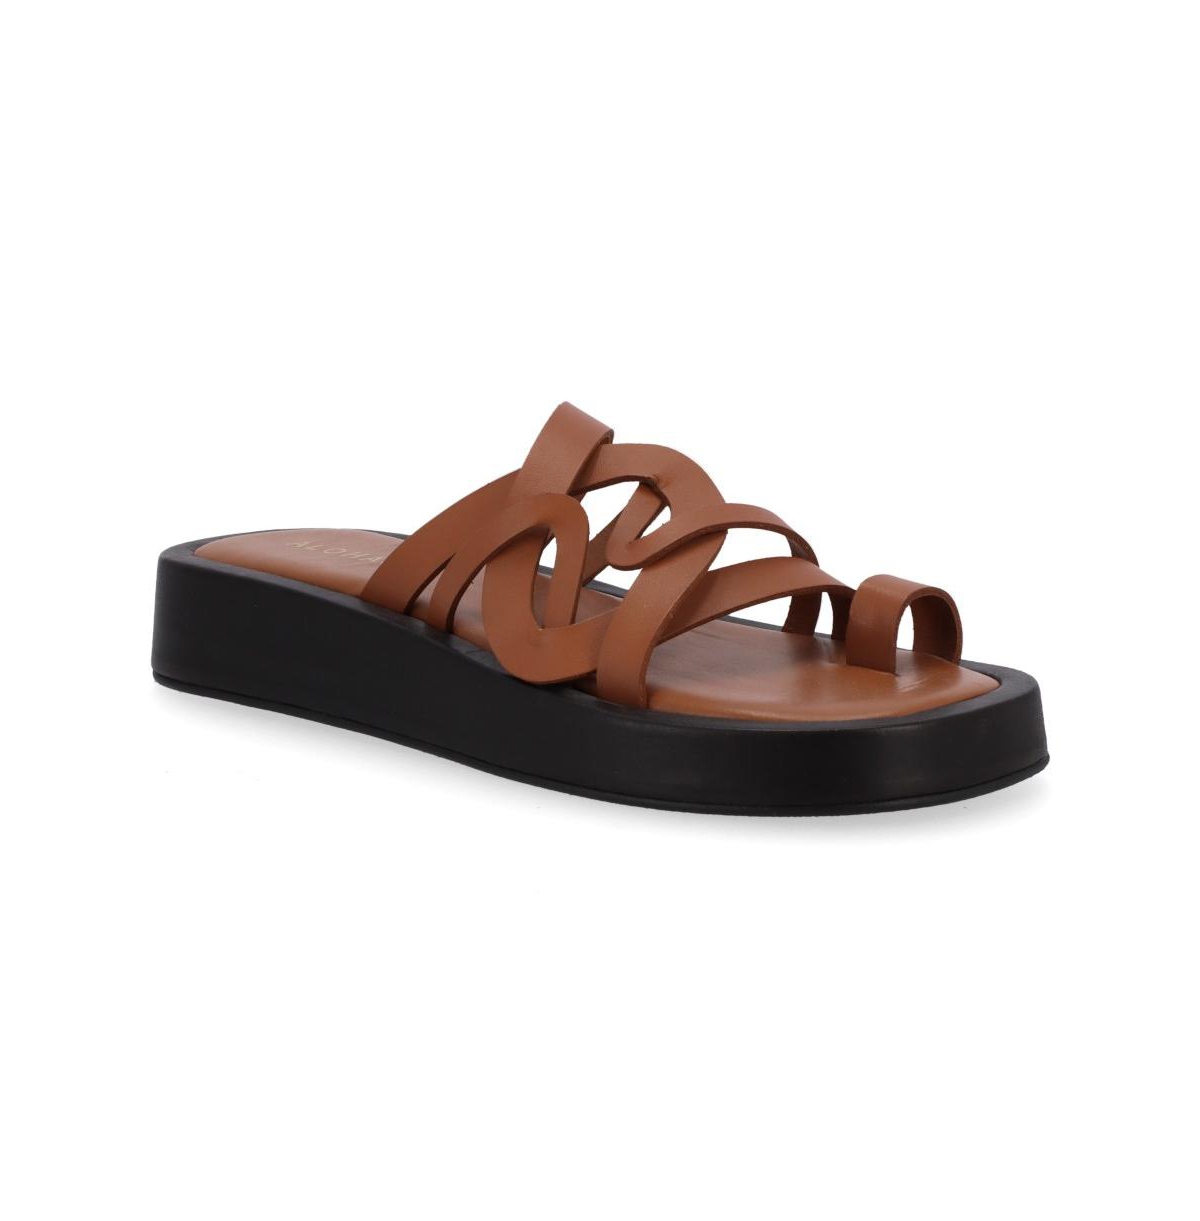 ALOHAS WOMEN'S COOL LEATHER SANDALS